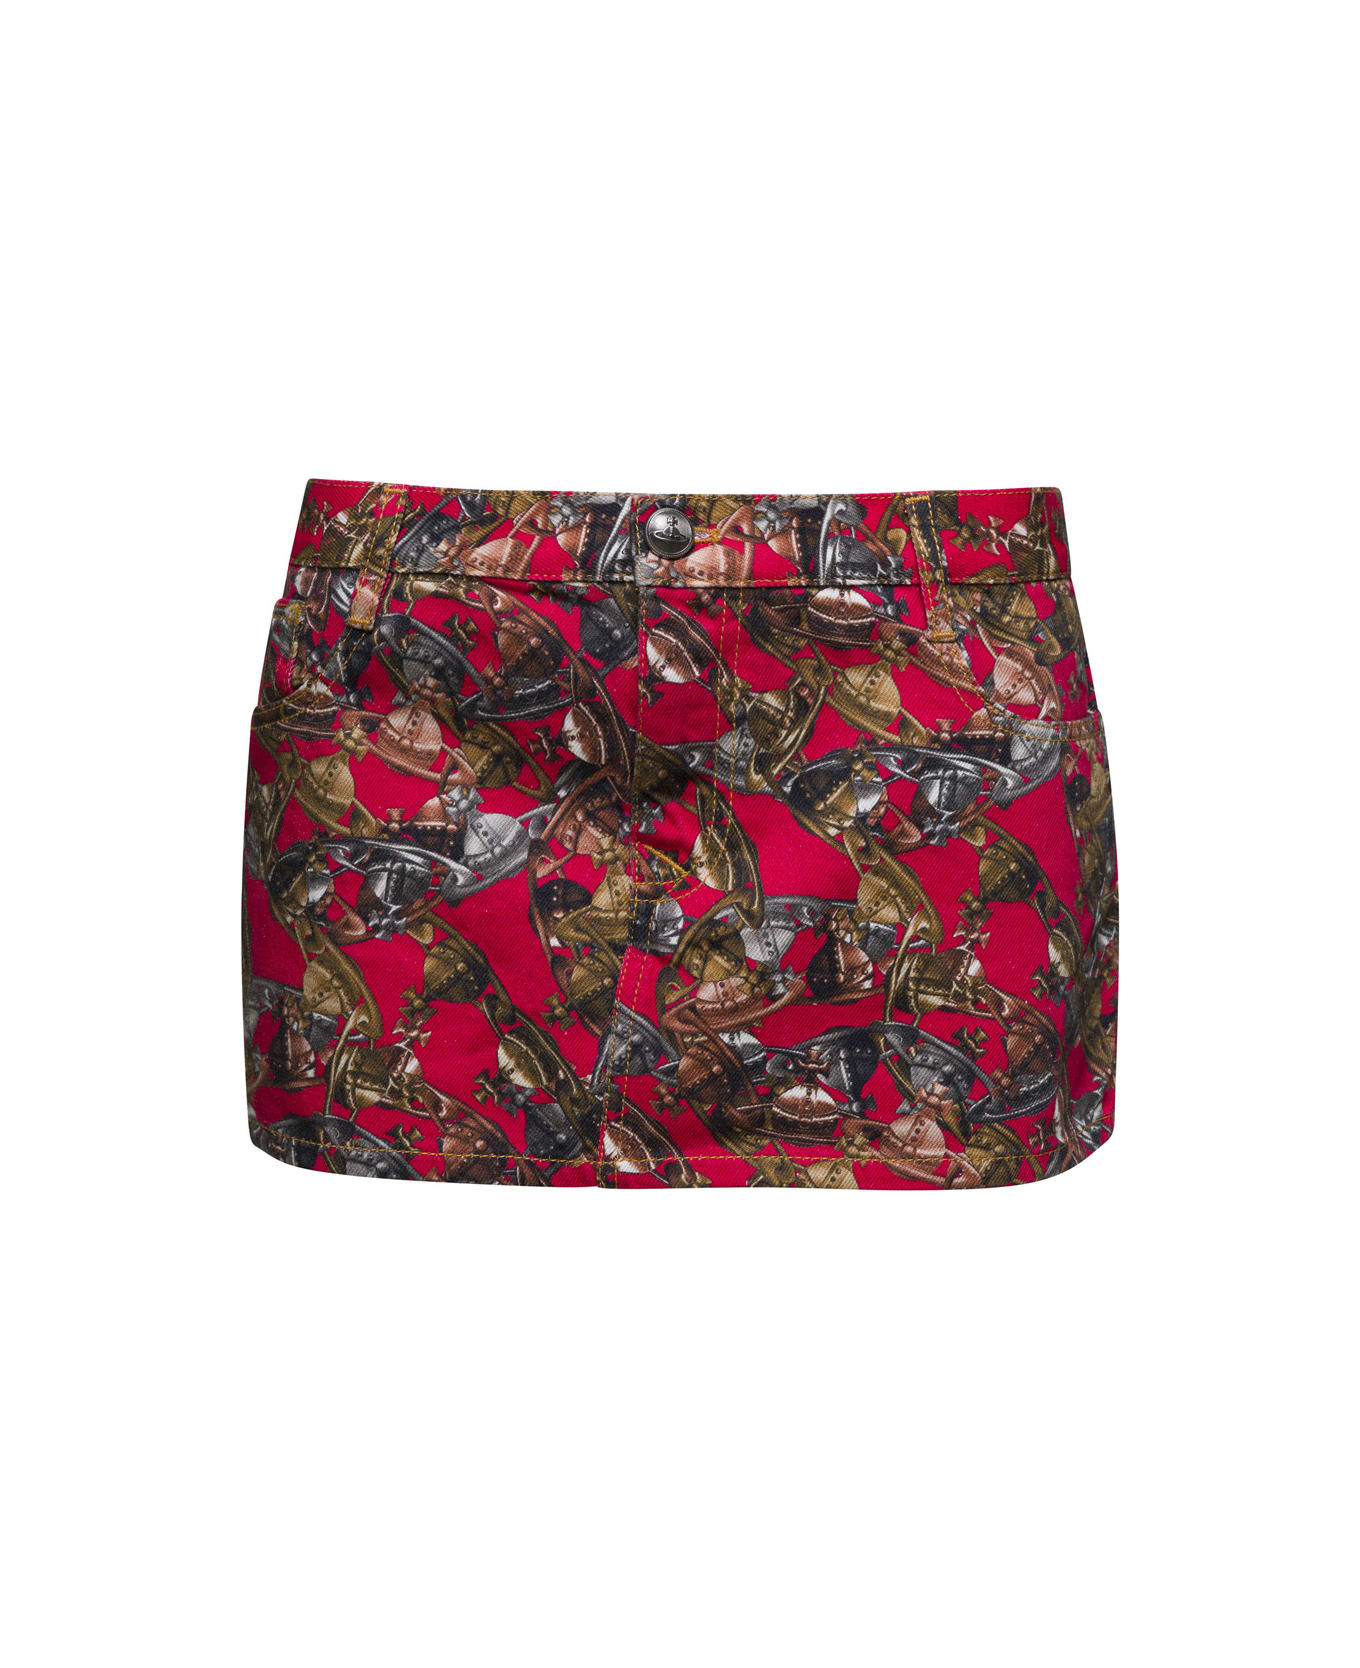 Vivienne Westwood Red Printed Mini Skirt In Cotton Woman - Red スカート